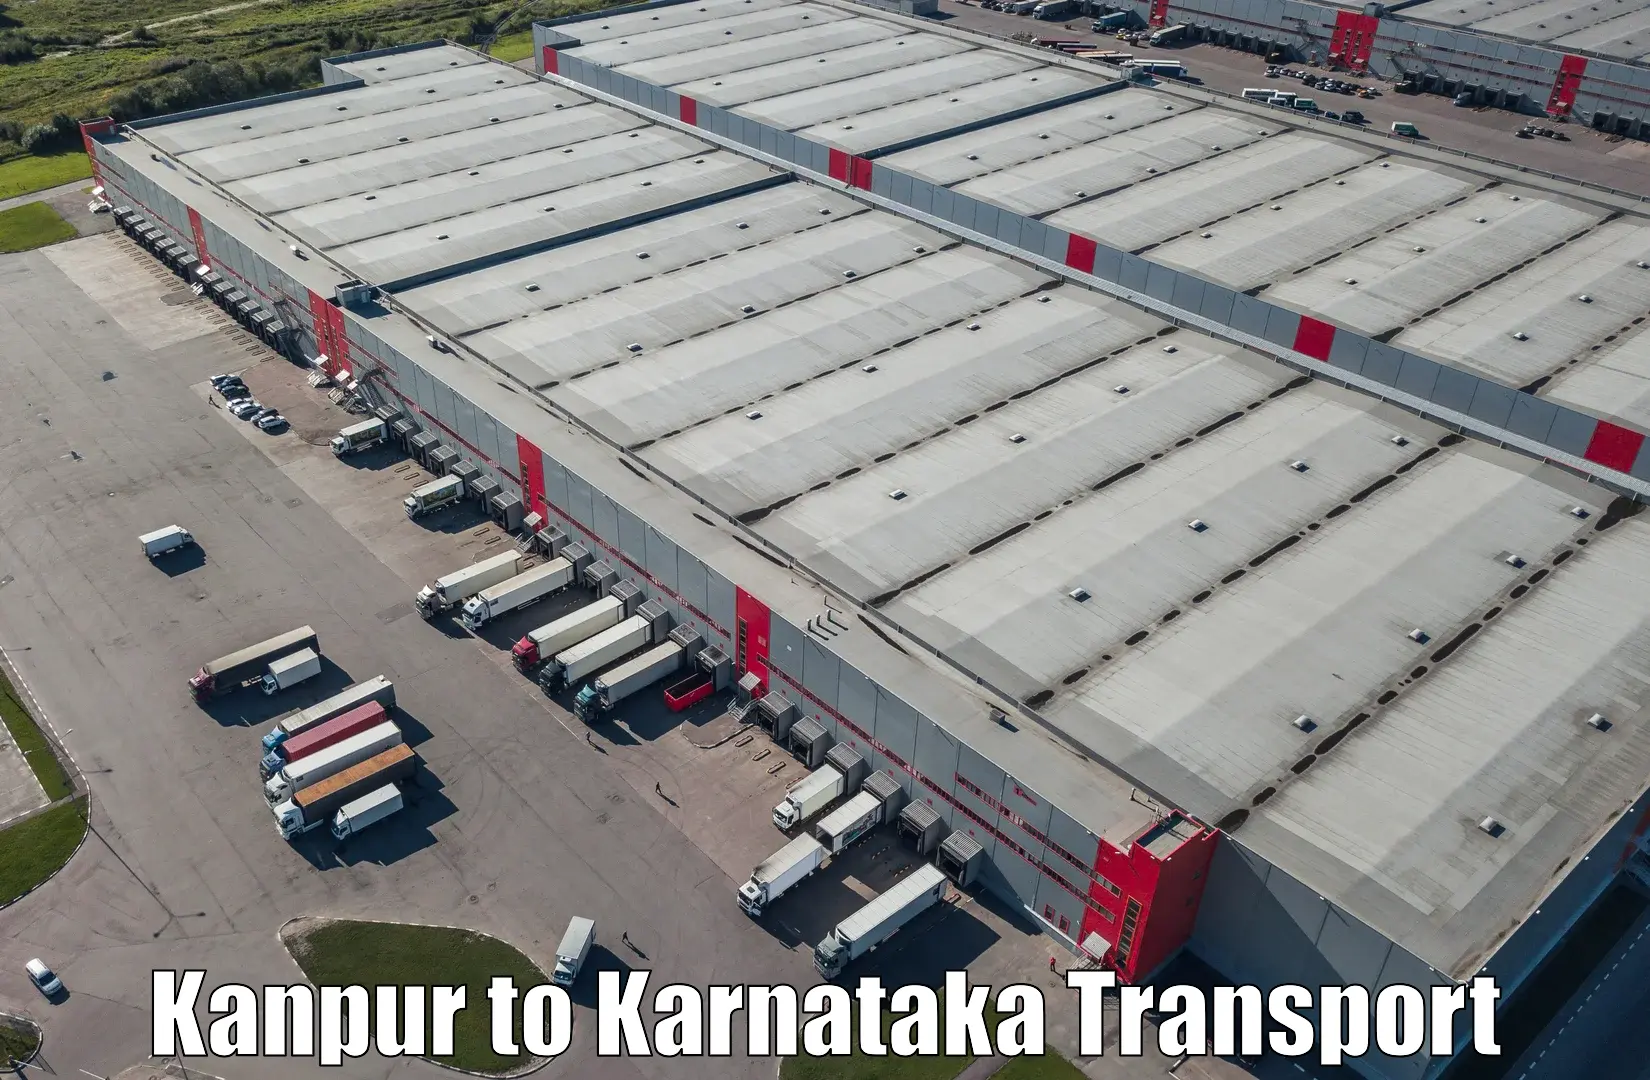 Furniture transport service in Kanpur to Kollegal